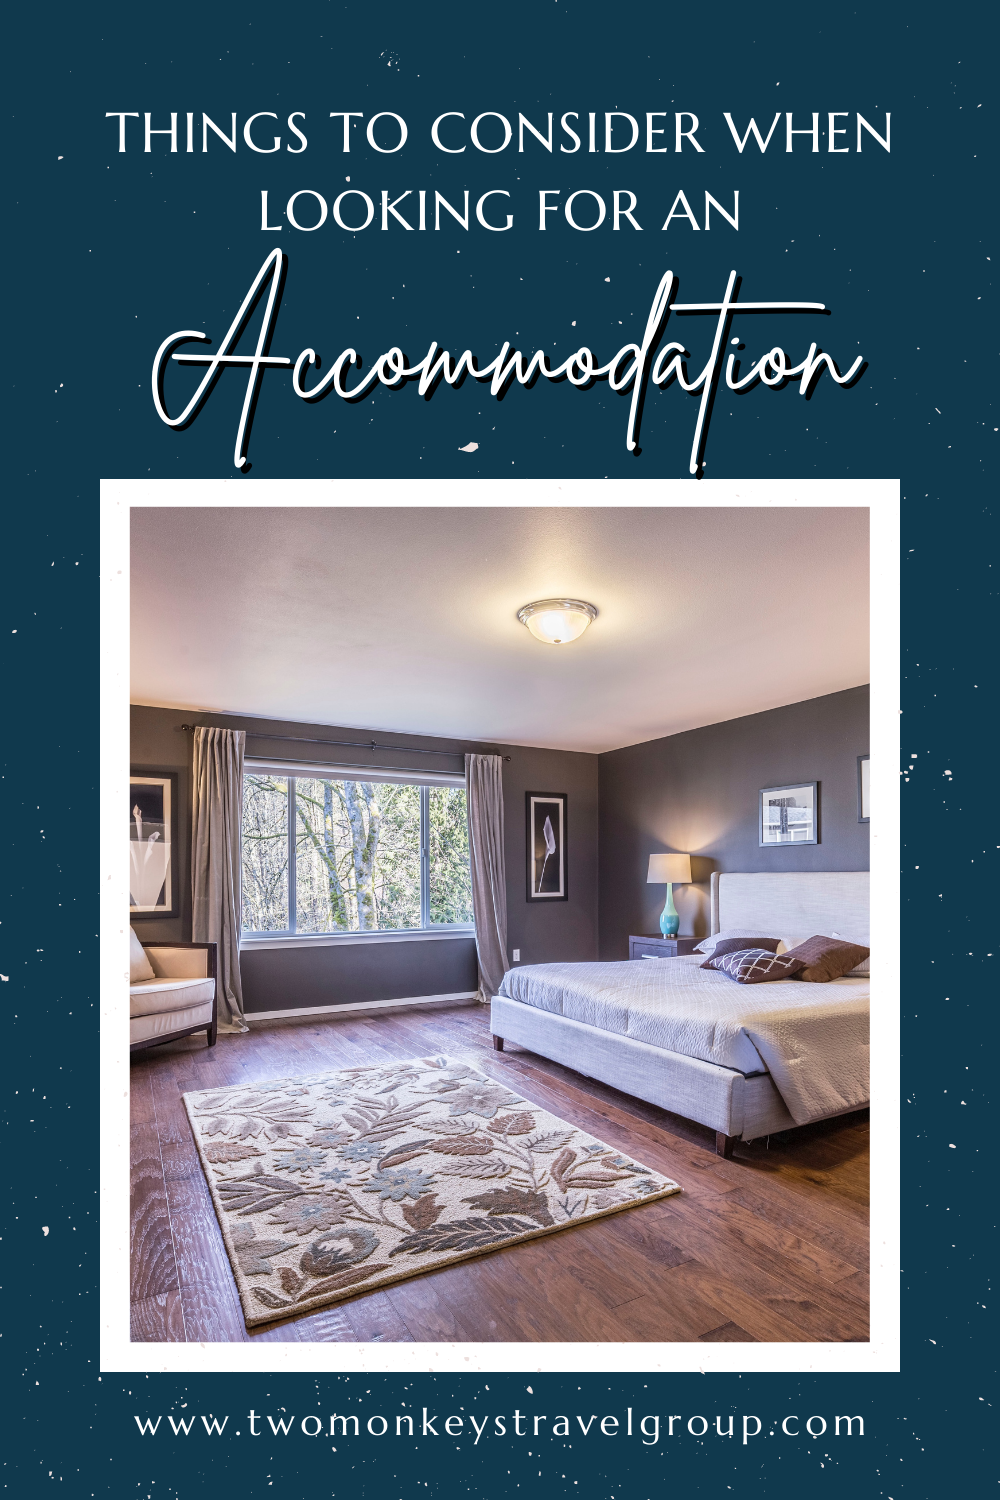 4 Things to Consider When Looking for an Accommodation